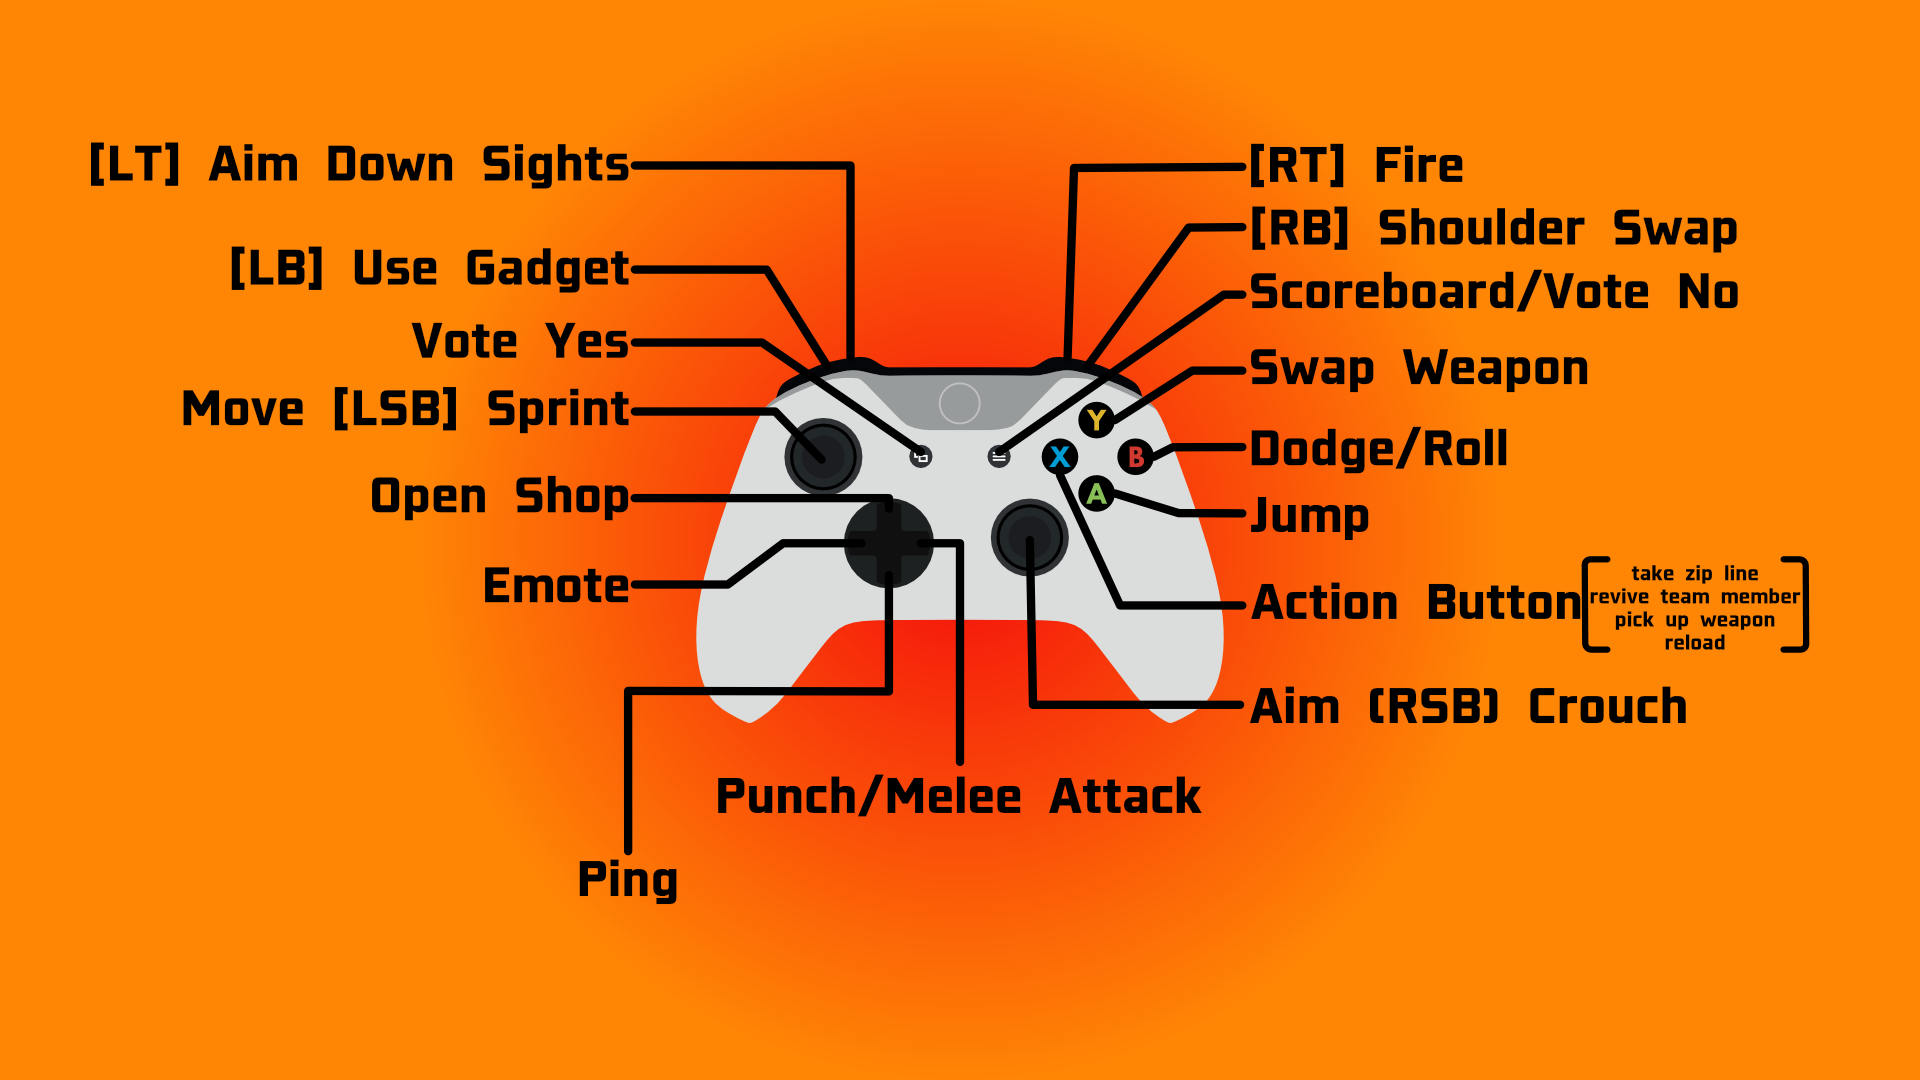 xbox controller buttons layout